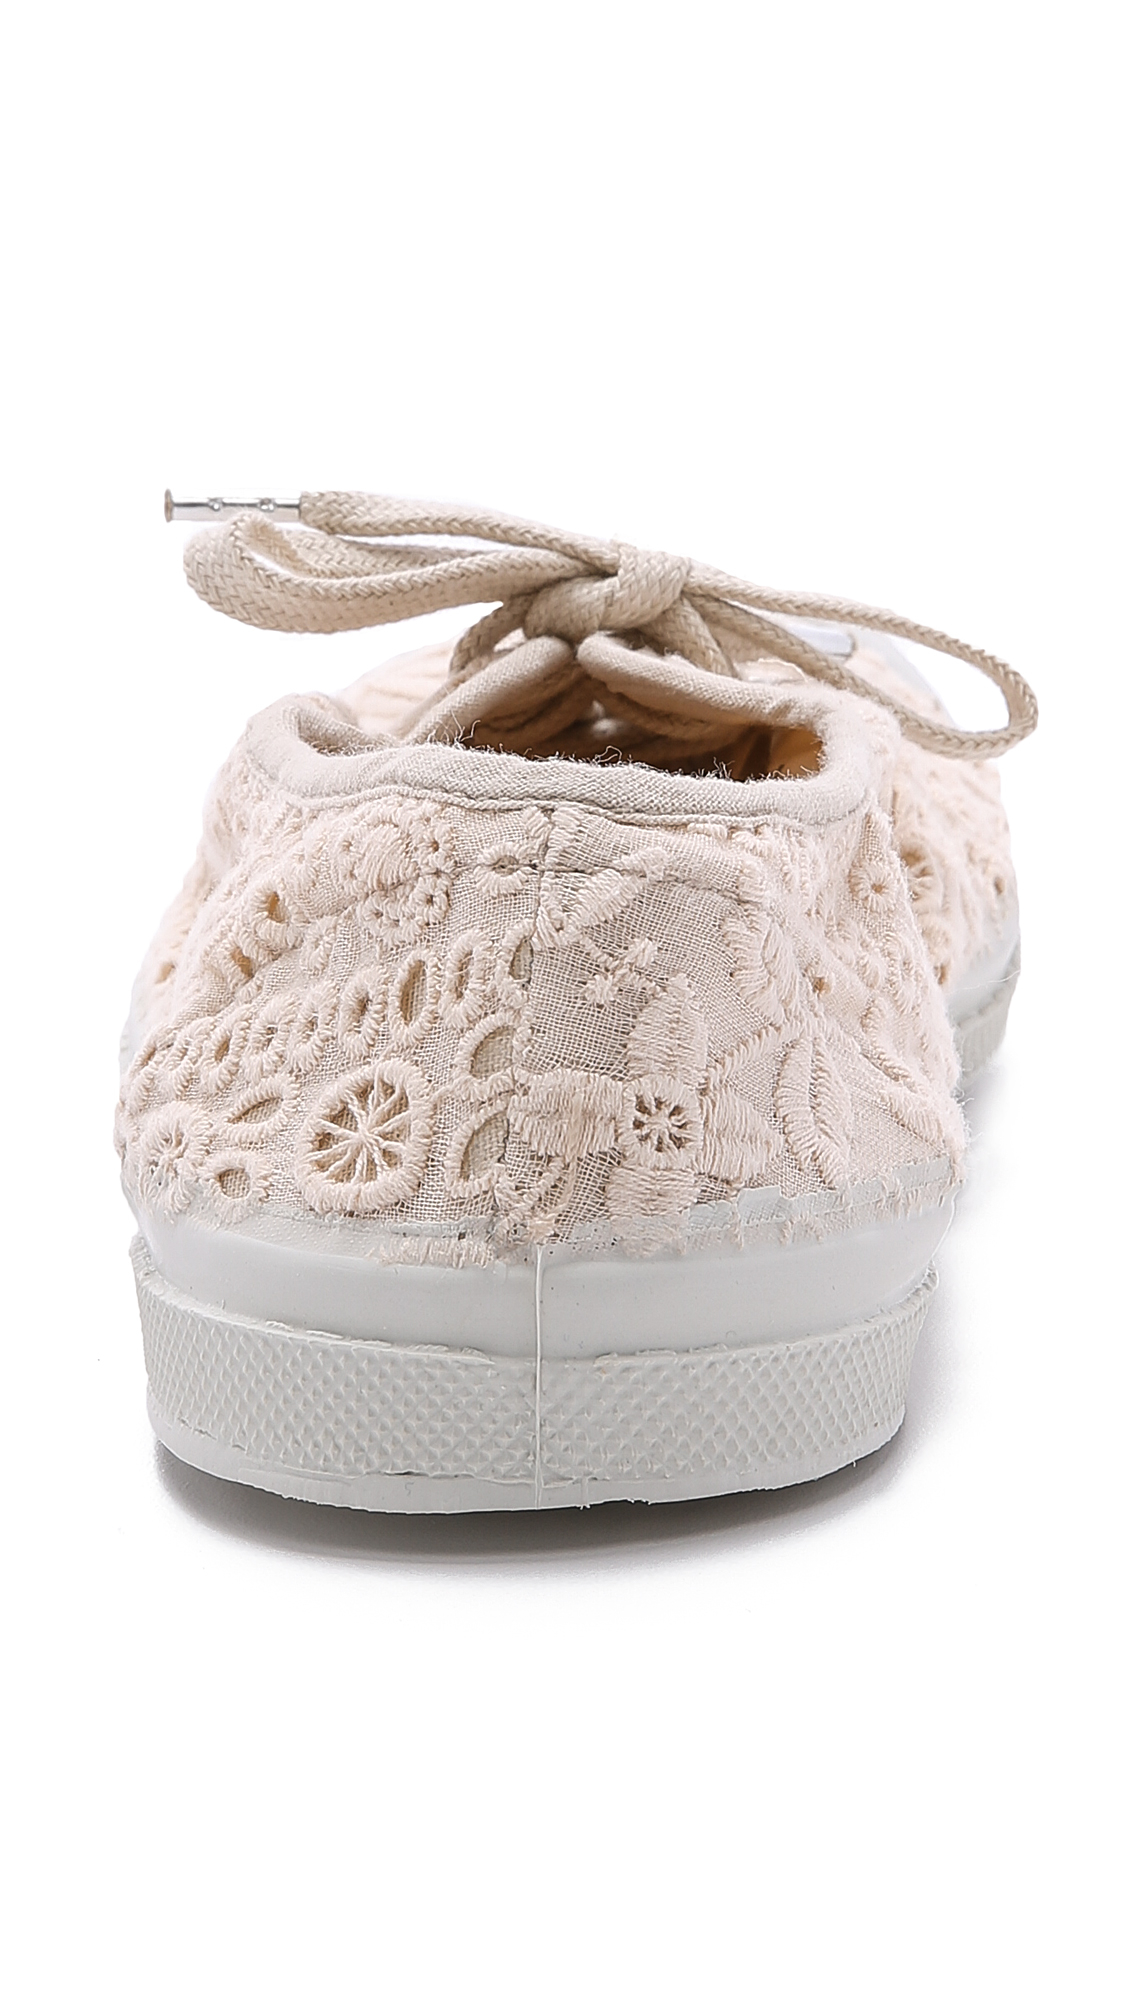 Bensimon Tennis Broderie Anglaise Sneakers - Coral in Powder (Natural) -  Lyst